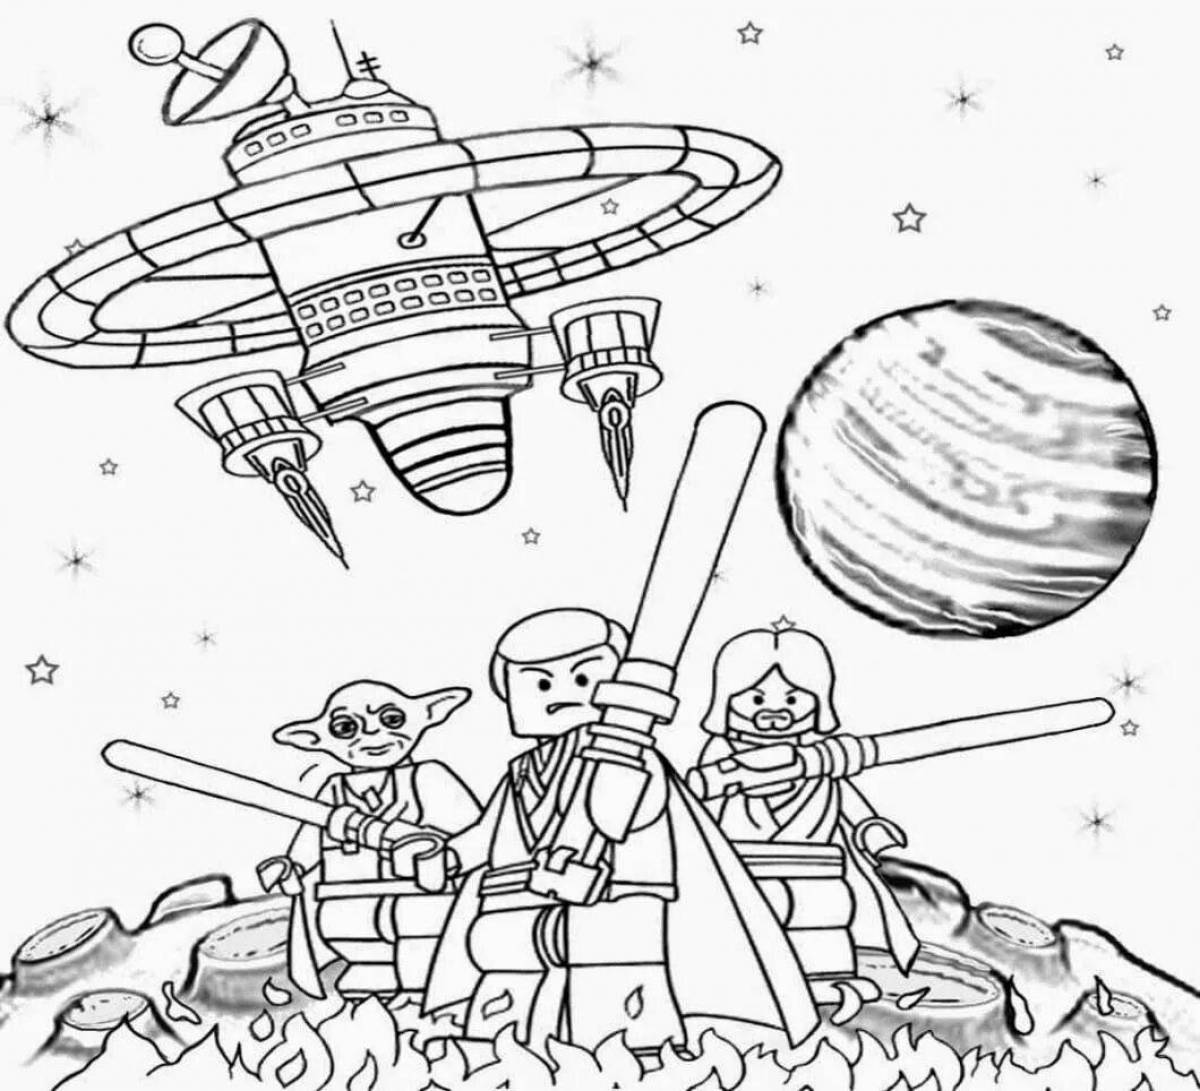 Epic space wars coloring book